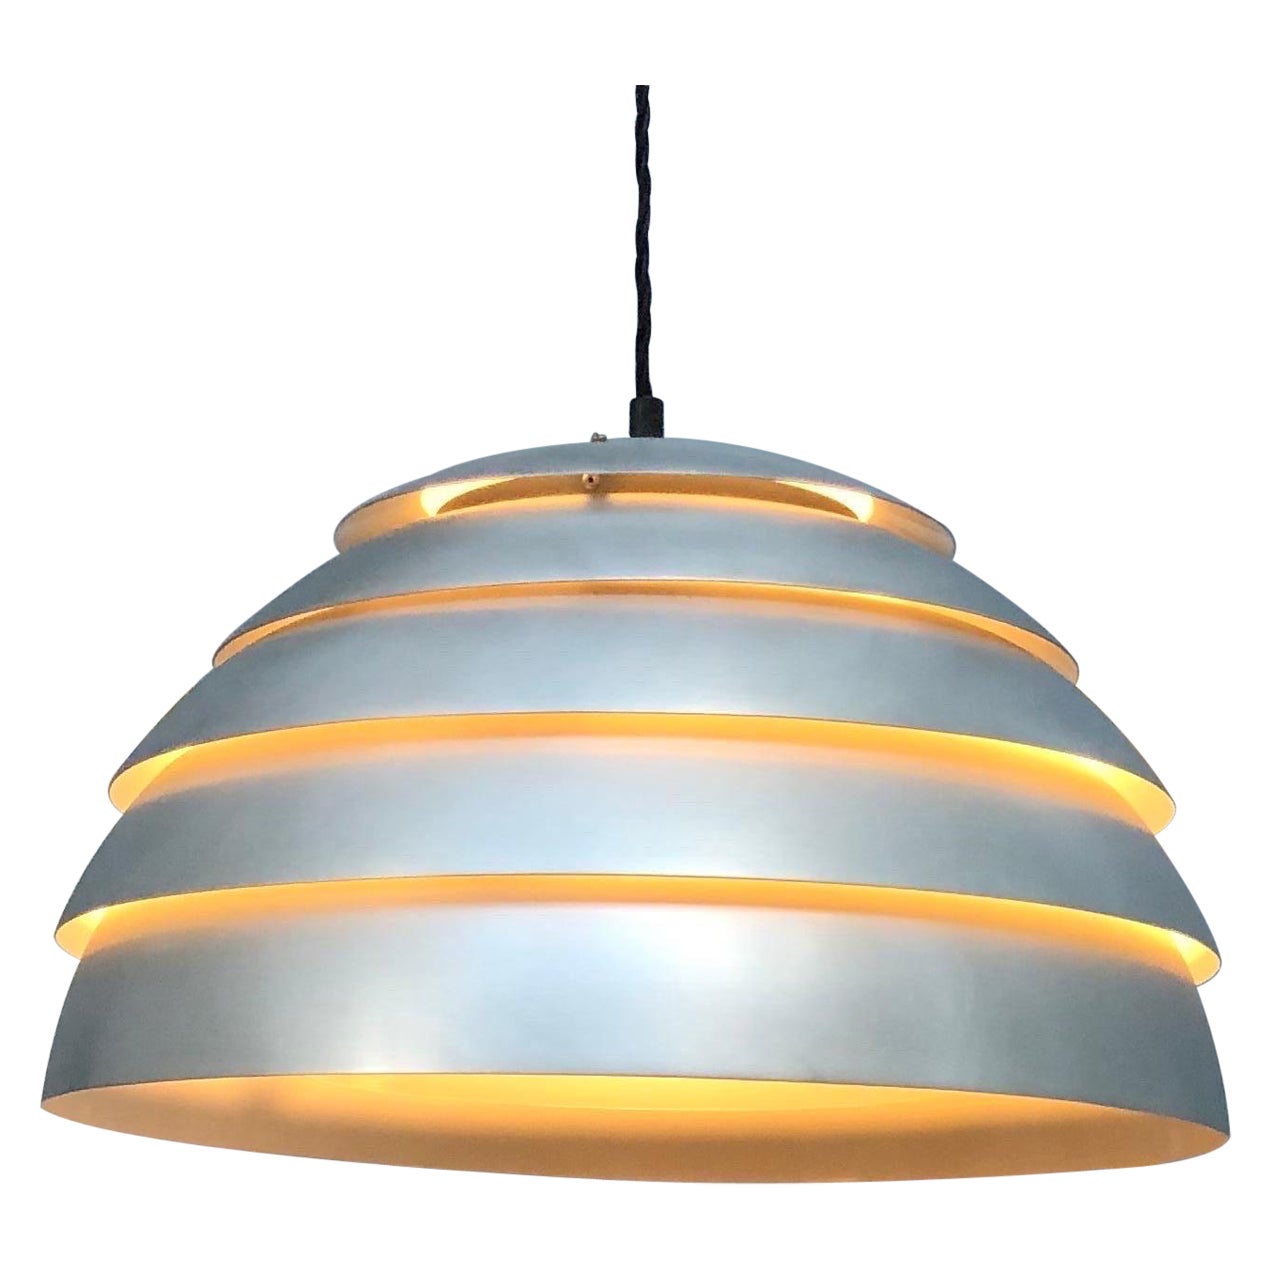 Vintage Hans Agne Jakobsson Pendant Lamp in Brushed Aluminum from the 1960s For Sale